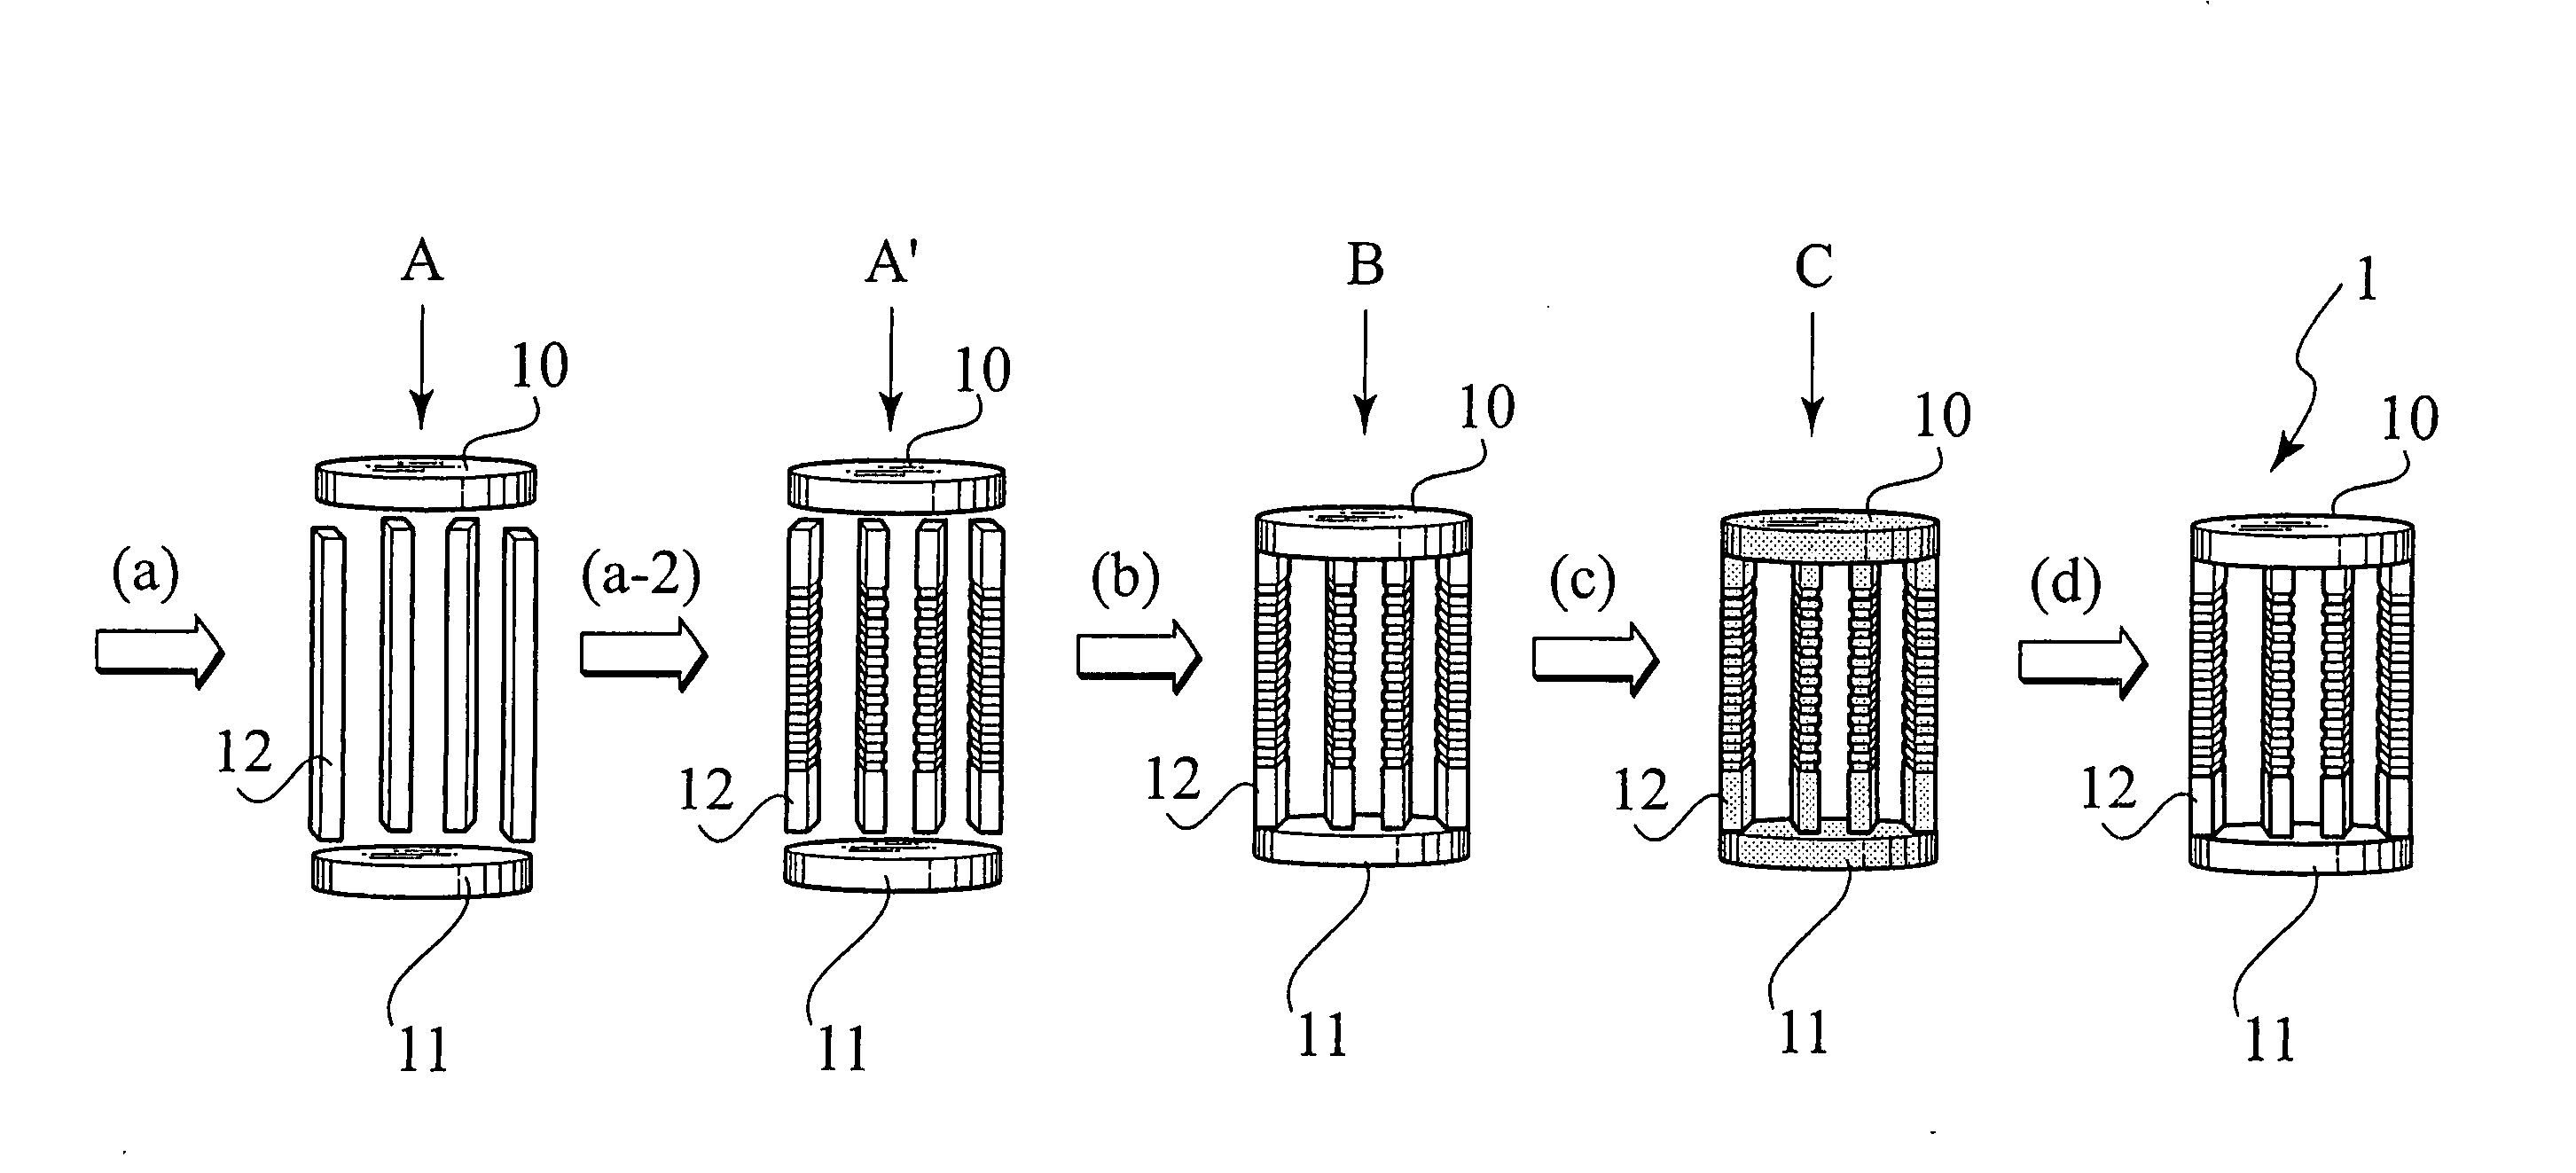 Method of producing silicon carbide sintered body jig, and silicon carbide sintered body jig obtained by the production method